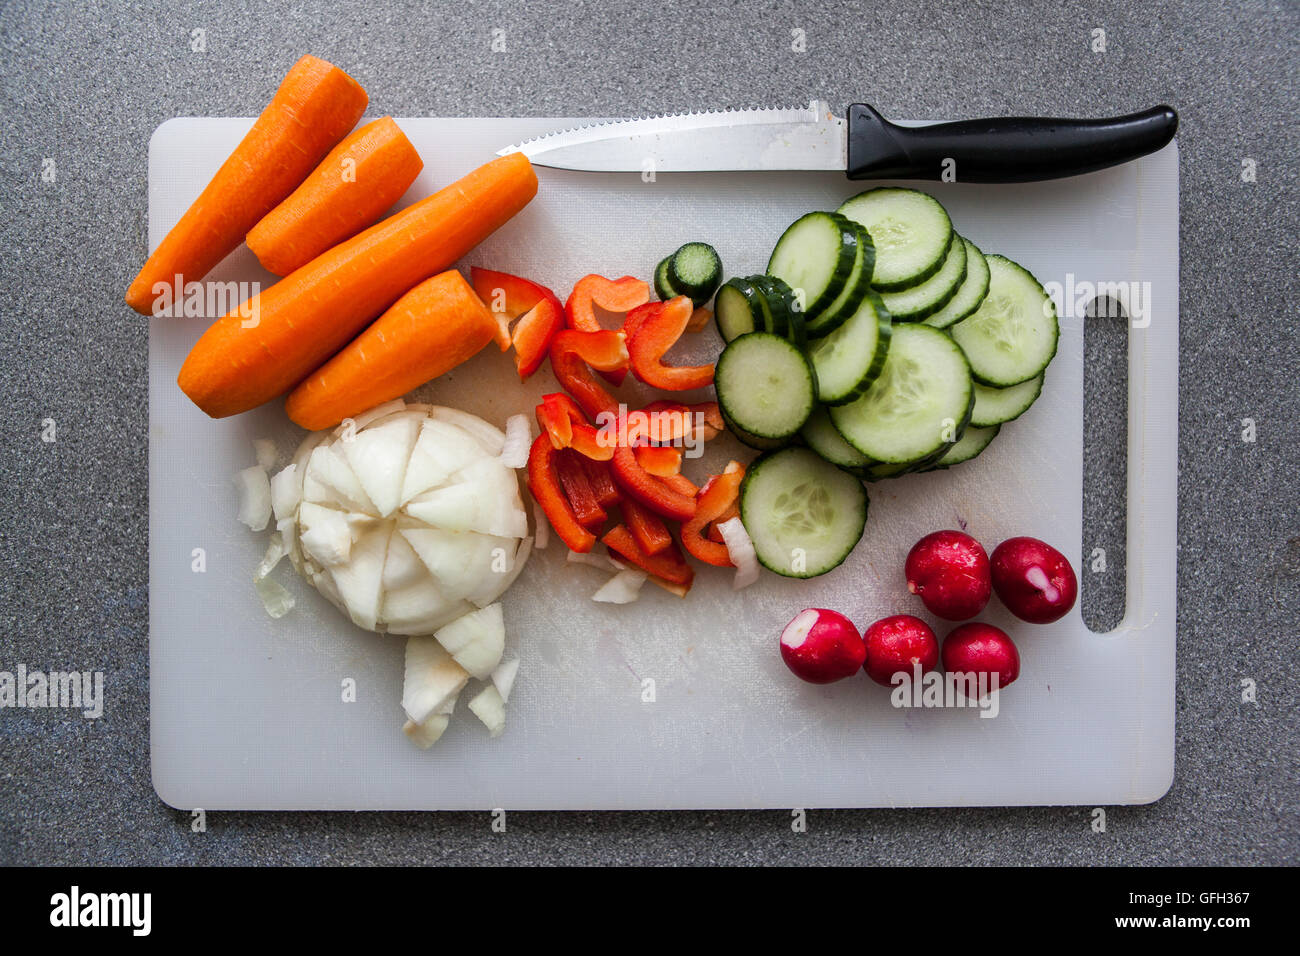 Salad vegetables on a chopping board. Stock Photo